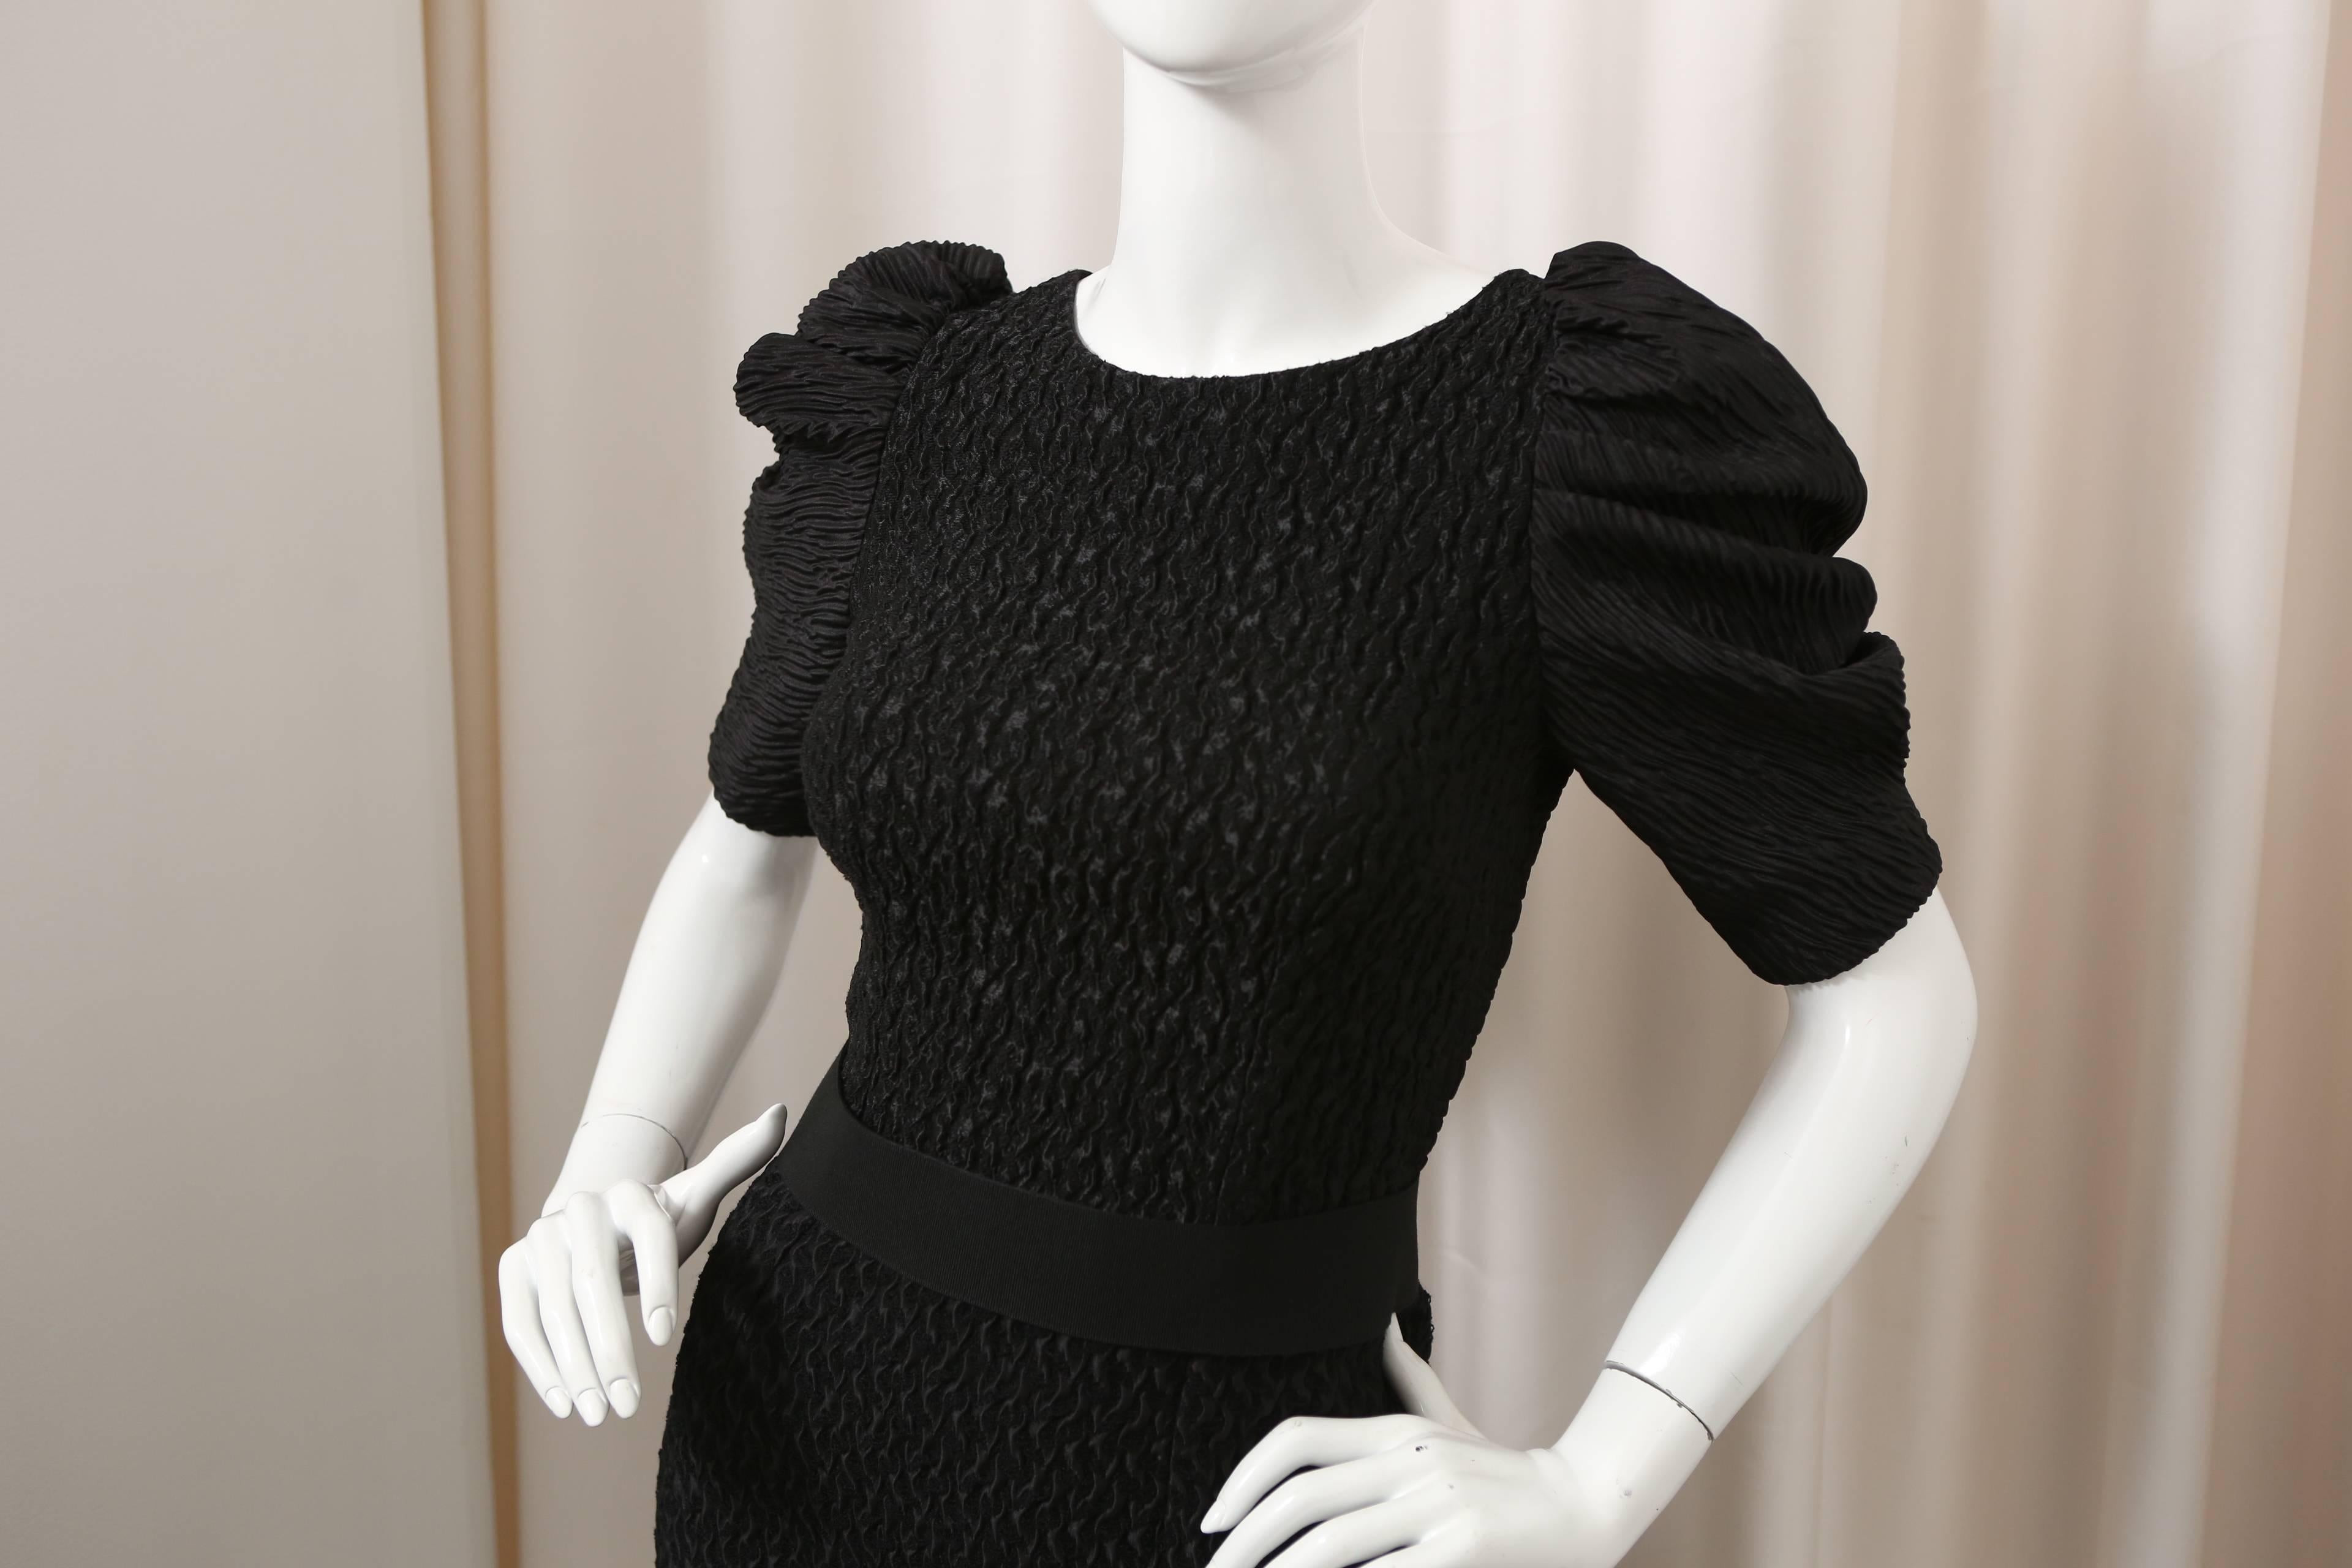 Dolce & Gabbana Puff-Sleeved Black Textured Dress with Attached Belt 1